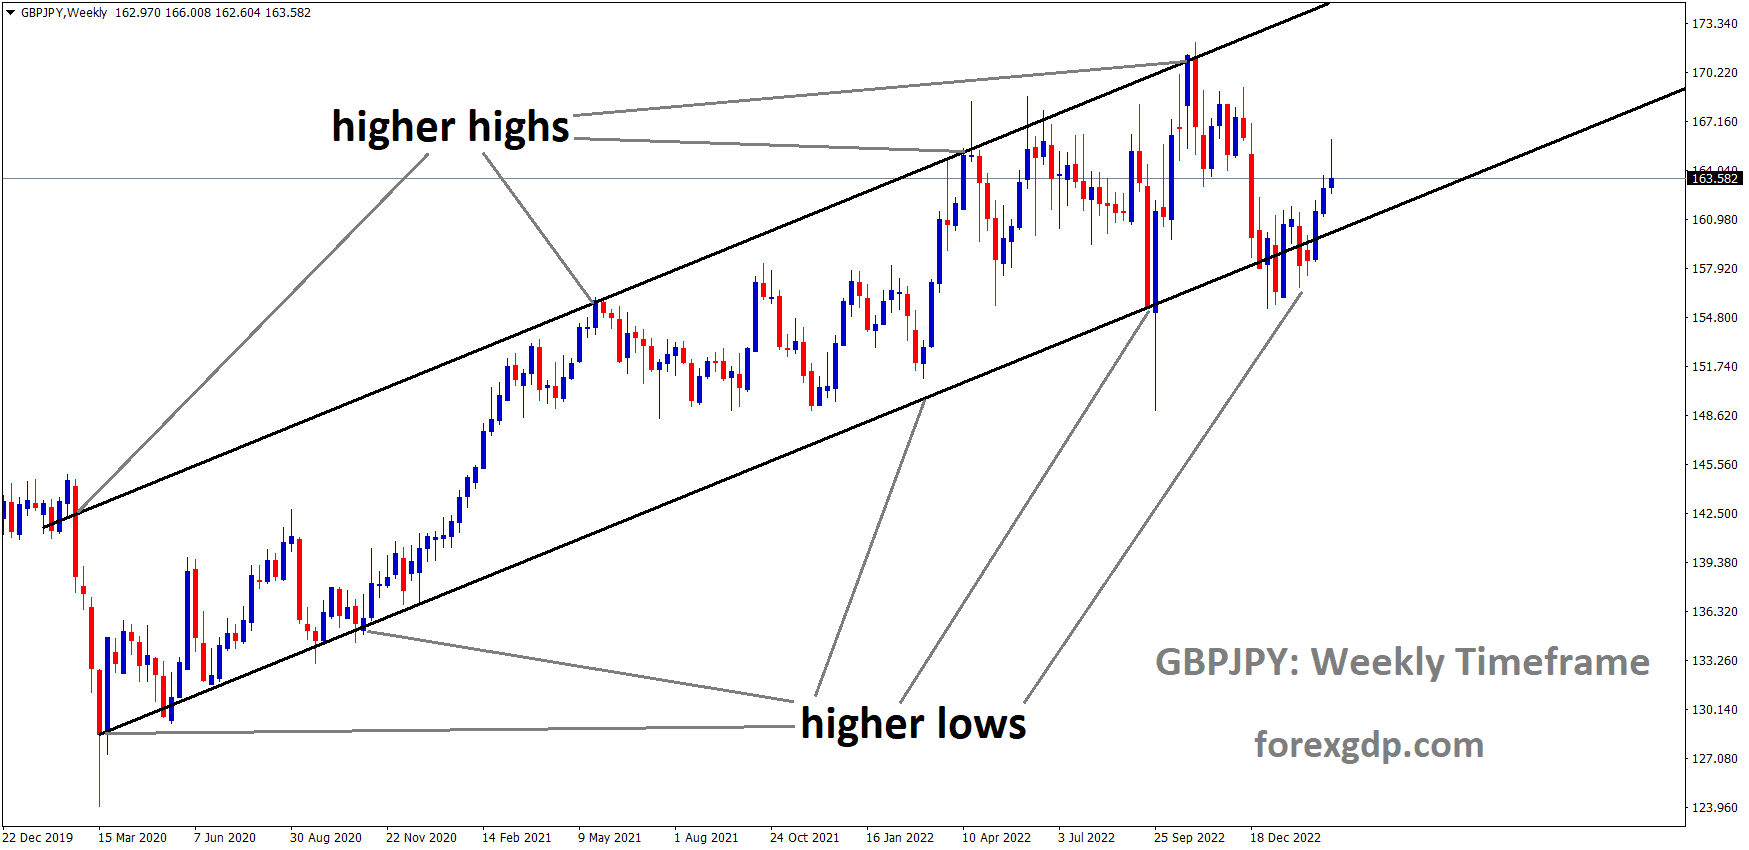 GBPJPY Weekly TF analysis Market is moving in an Ascending channel and the market has rebounded from the higher low area of the channel